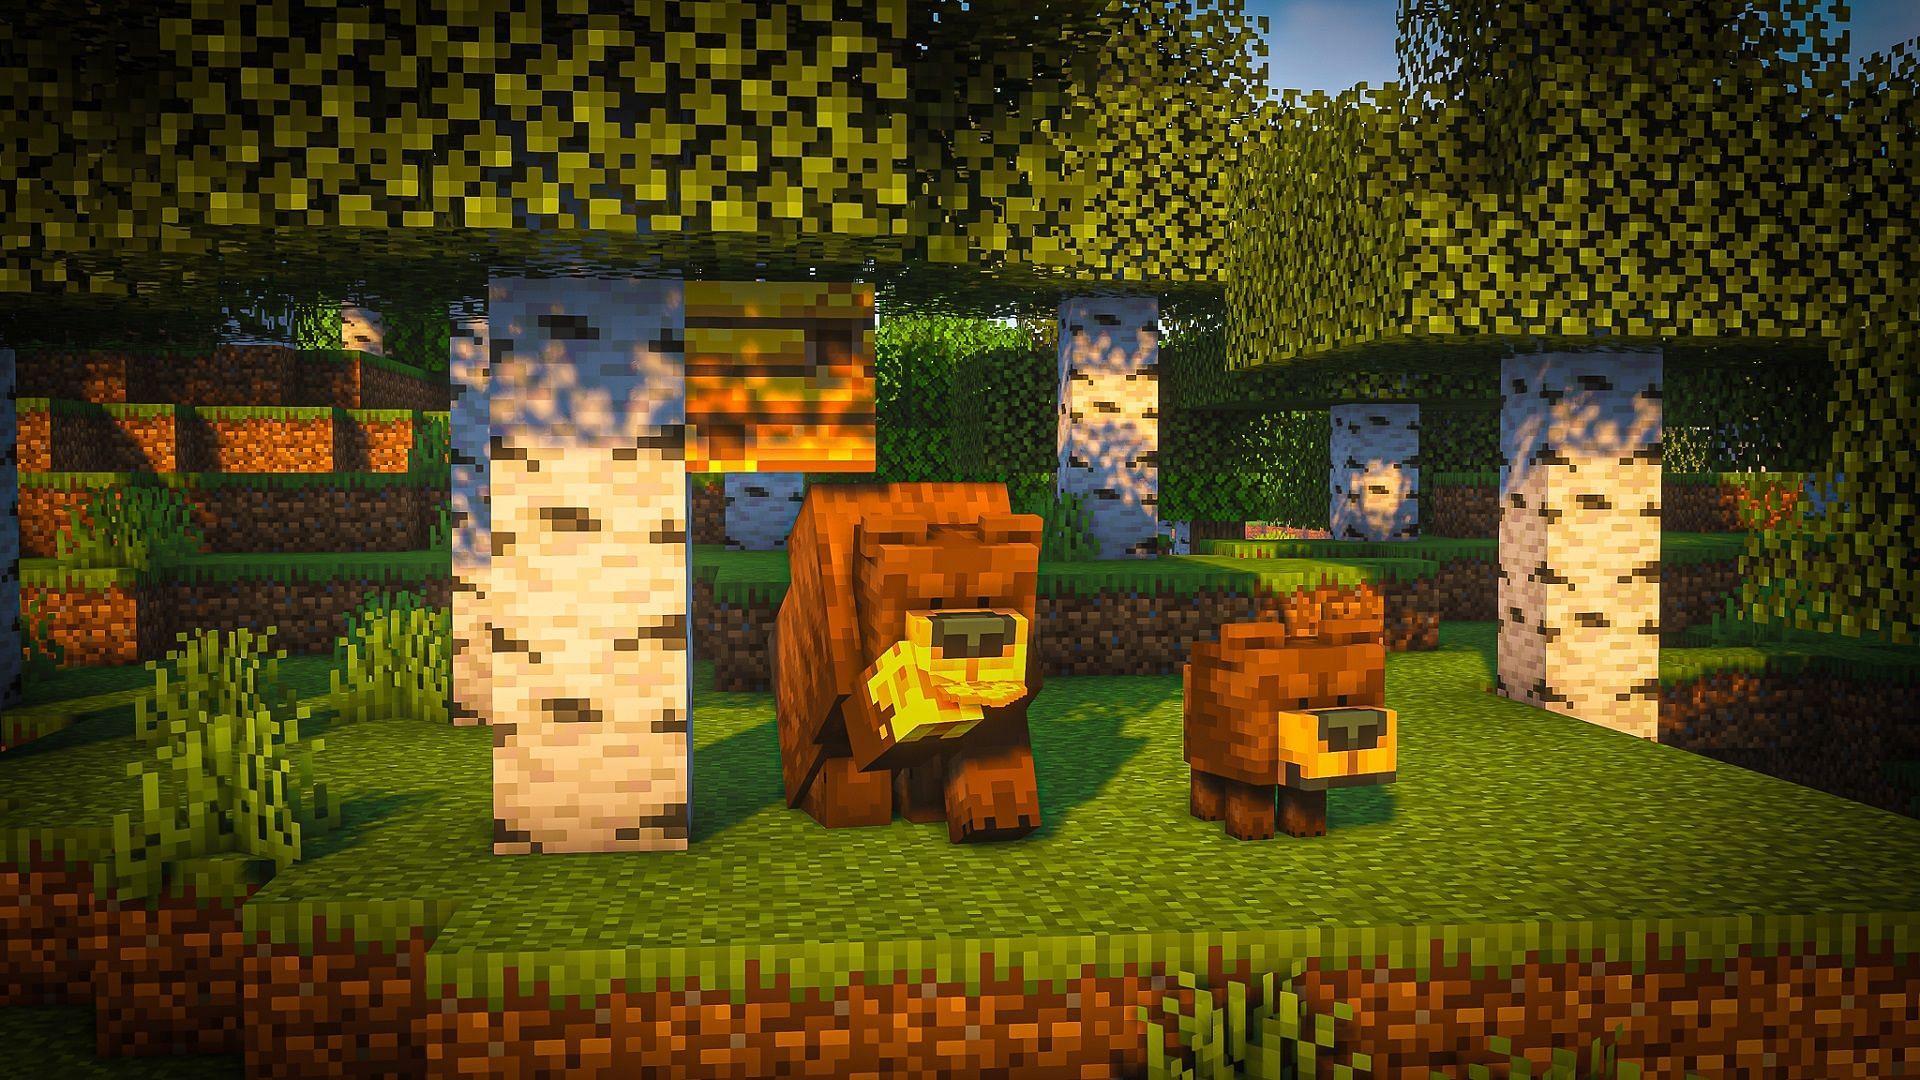 Grizzly bears roam a forest in the Naturalist mod for Minecraft (Image via Starfish_Studios/CurseForge)